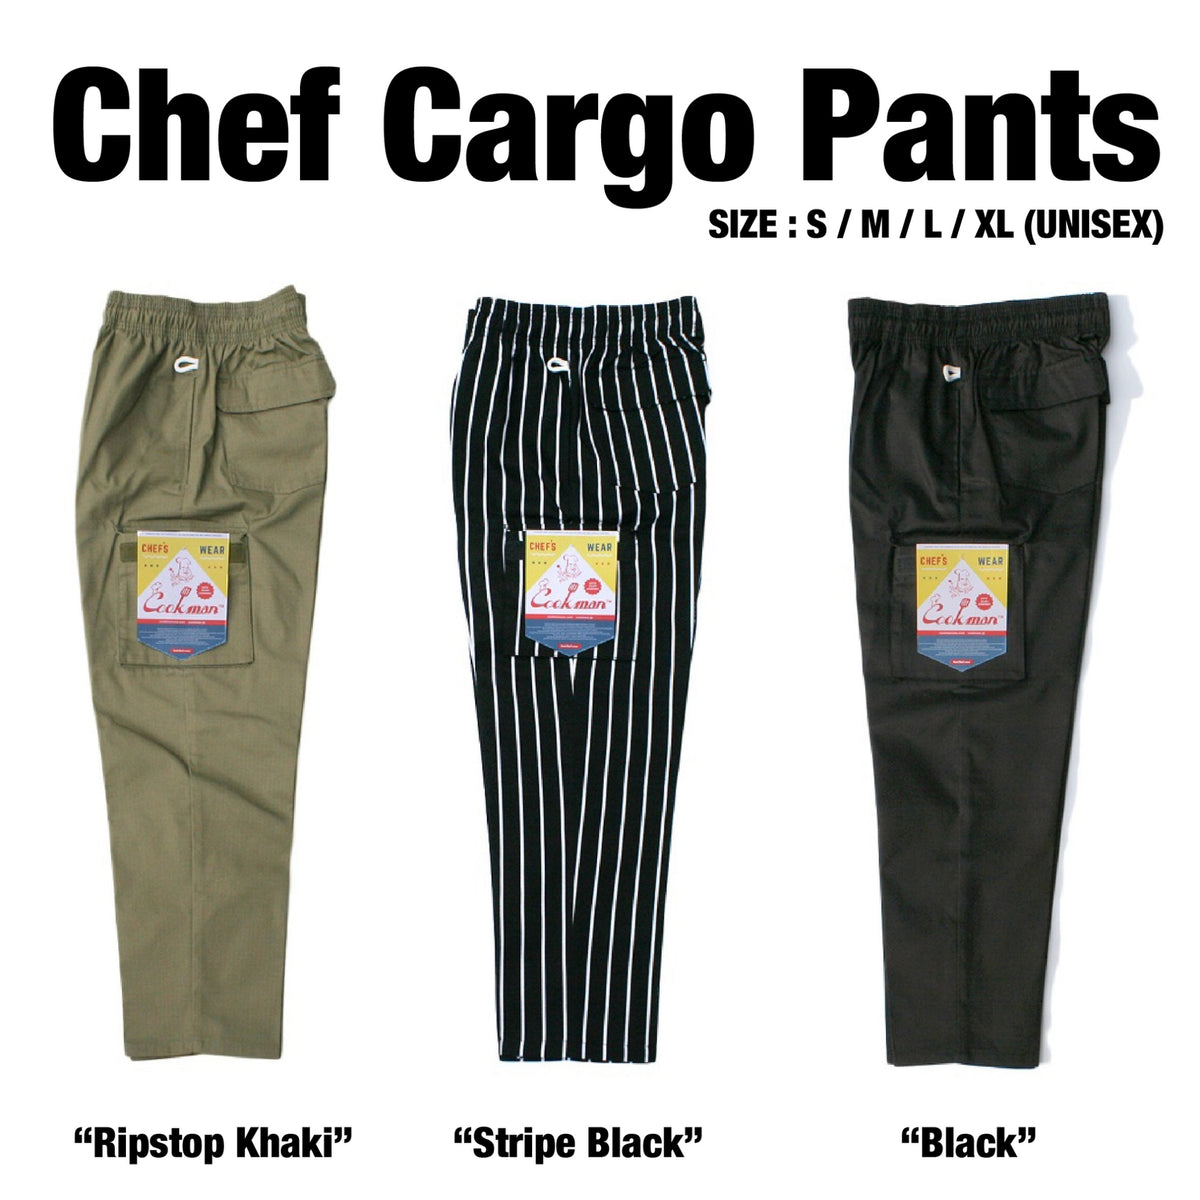 Cookman USA chef pants review: The ripstop pants are my favorite